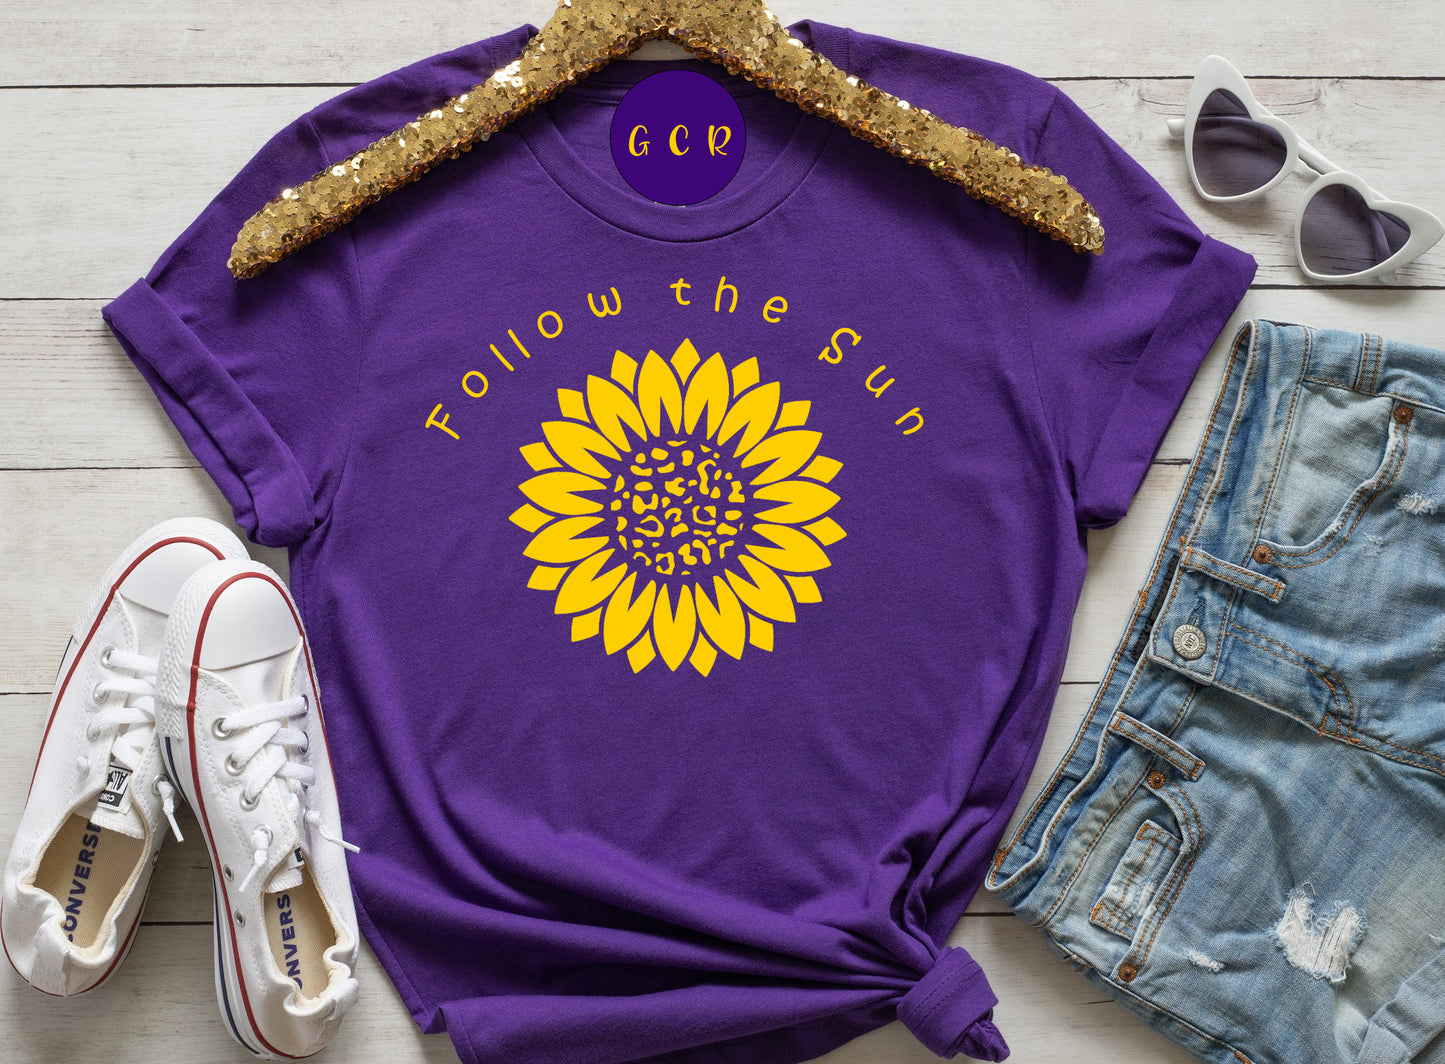 Purple short sleeve Tshirt with a yellow sunflower and the saying follow the sun in yellow